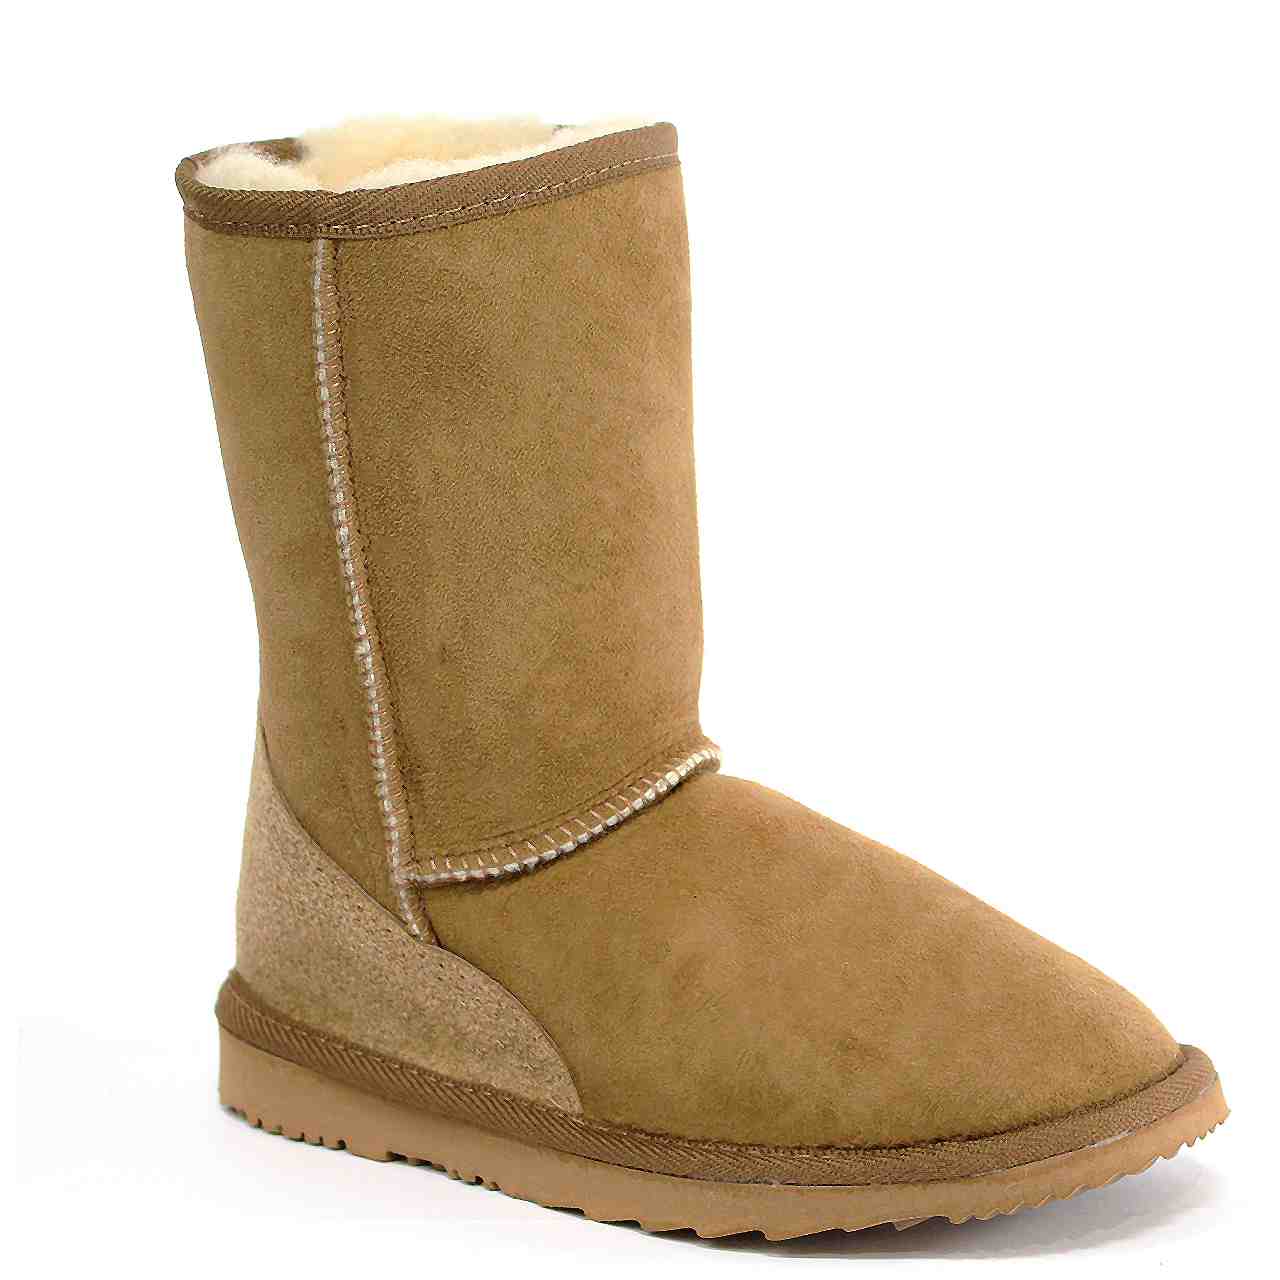 3/4 Tidal Boots Made by Ugg Australia